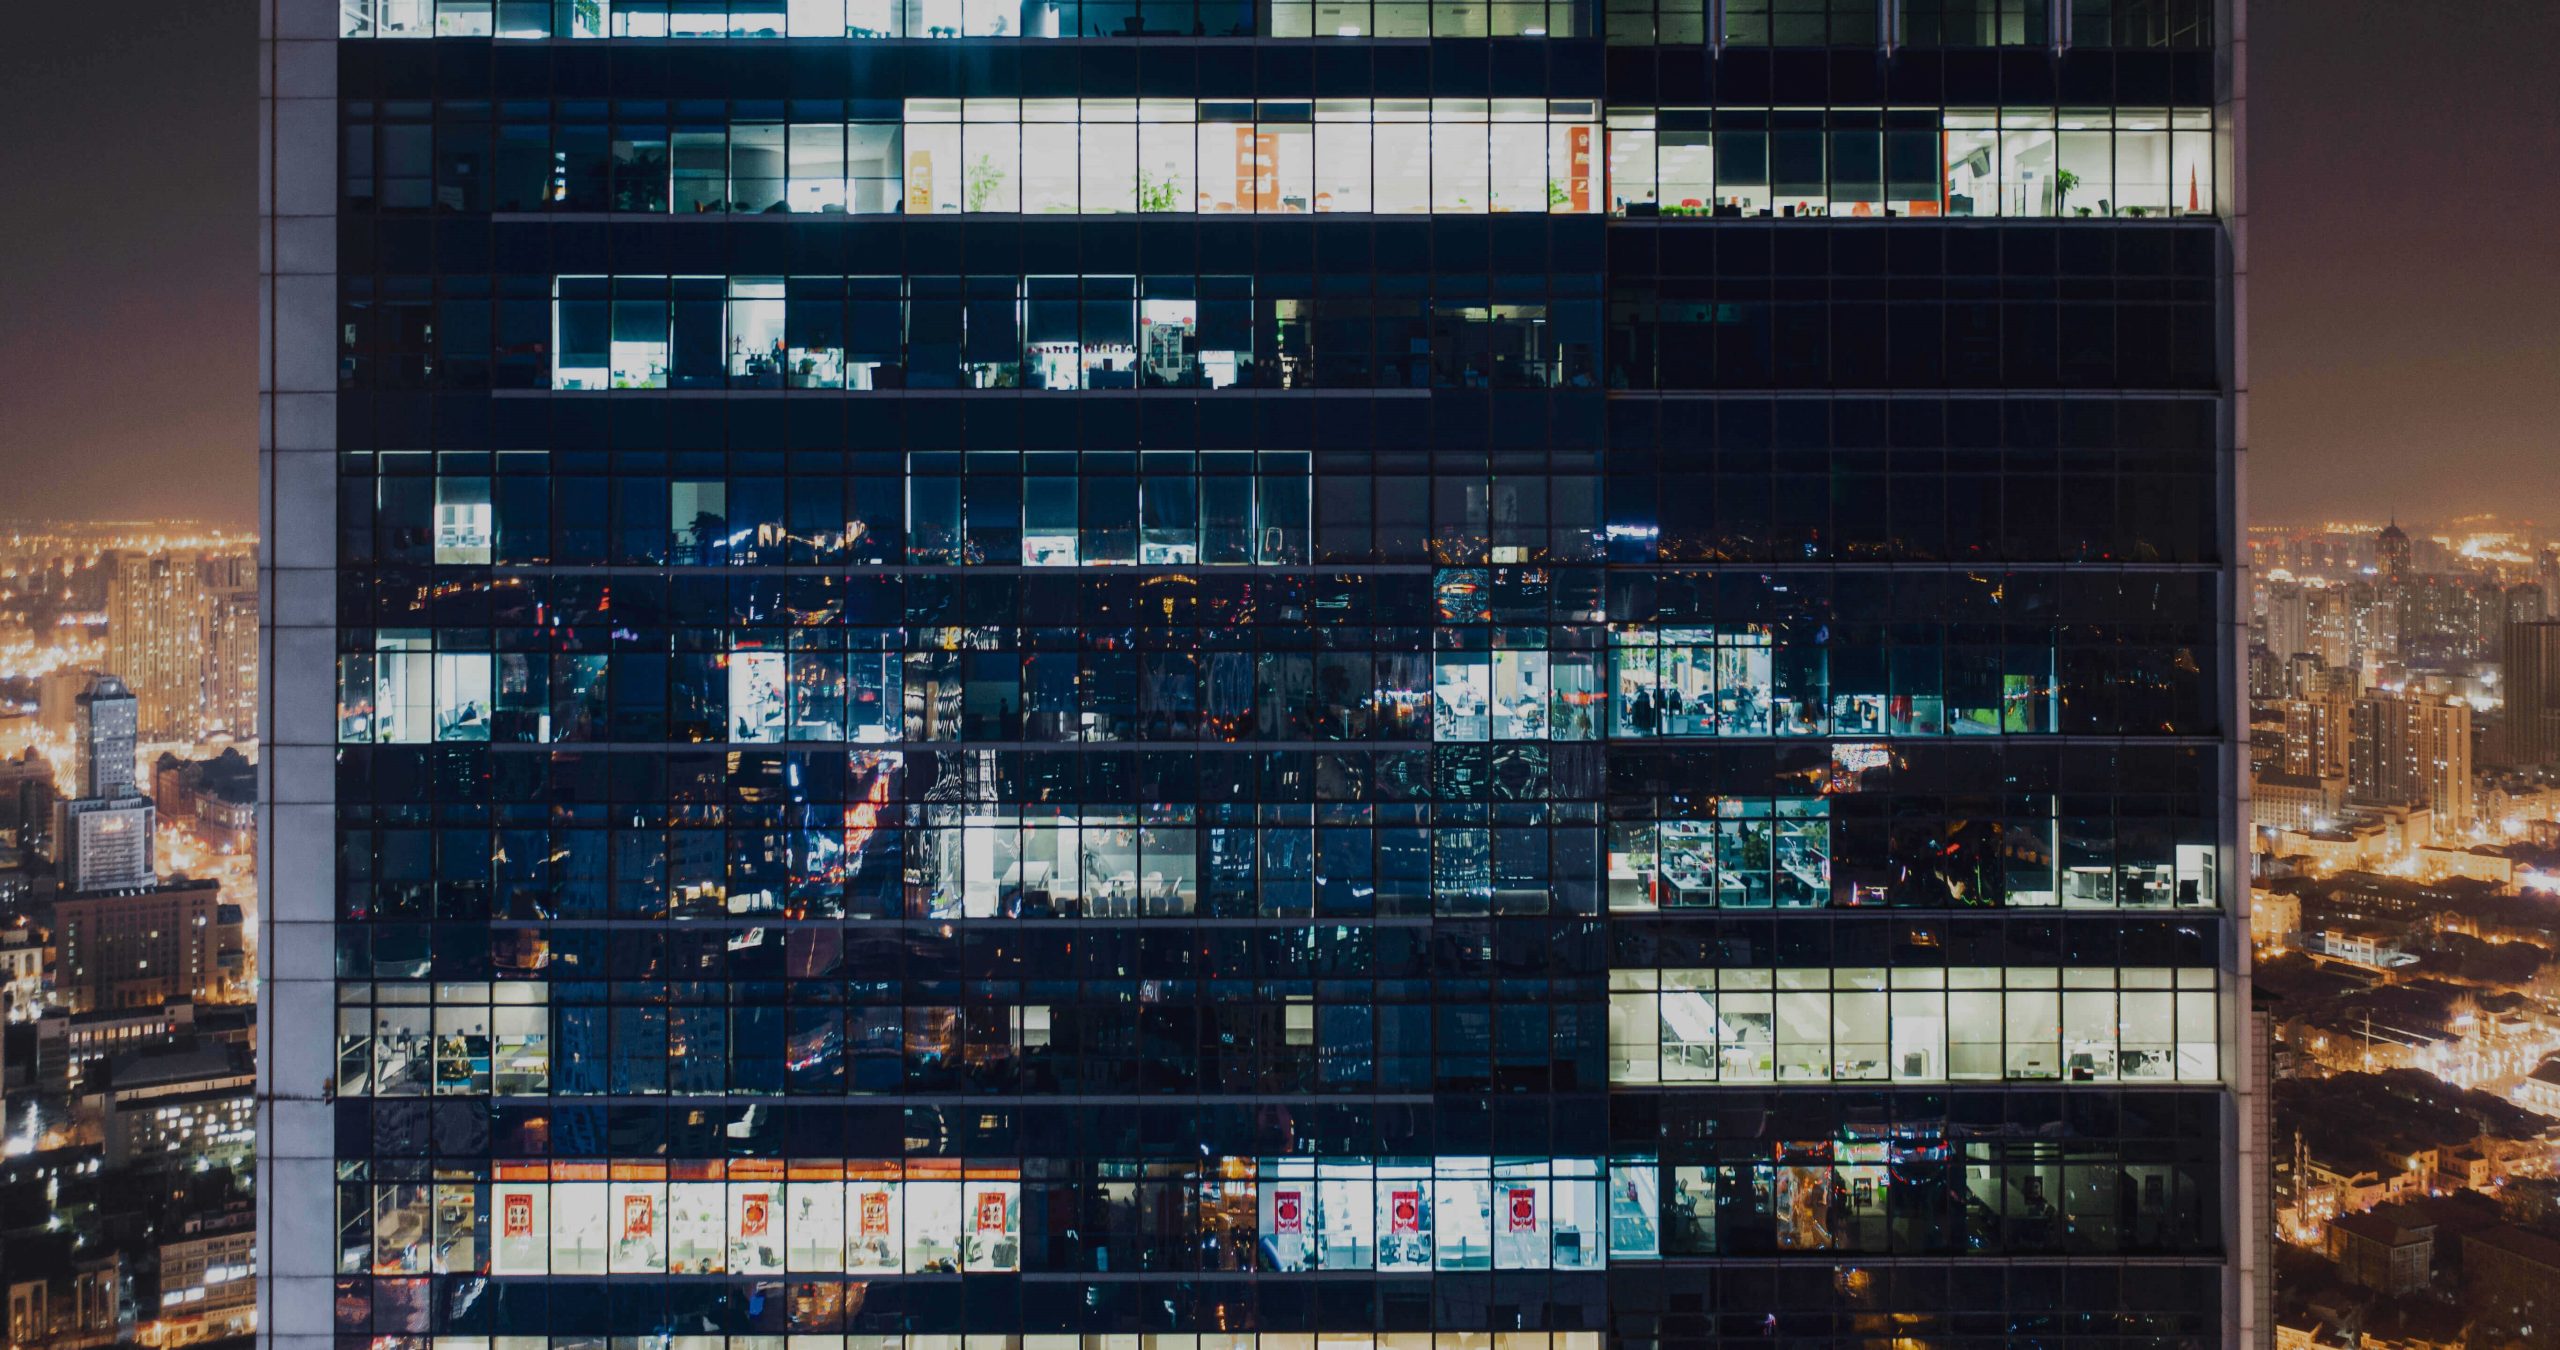 Image of an office building at night with window lit up